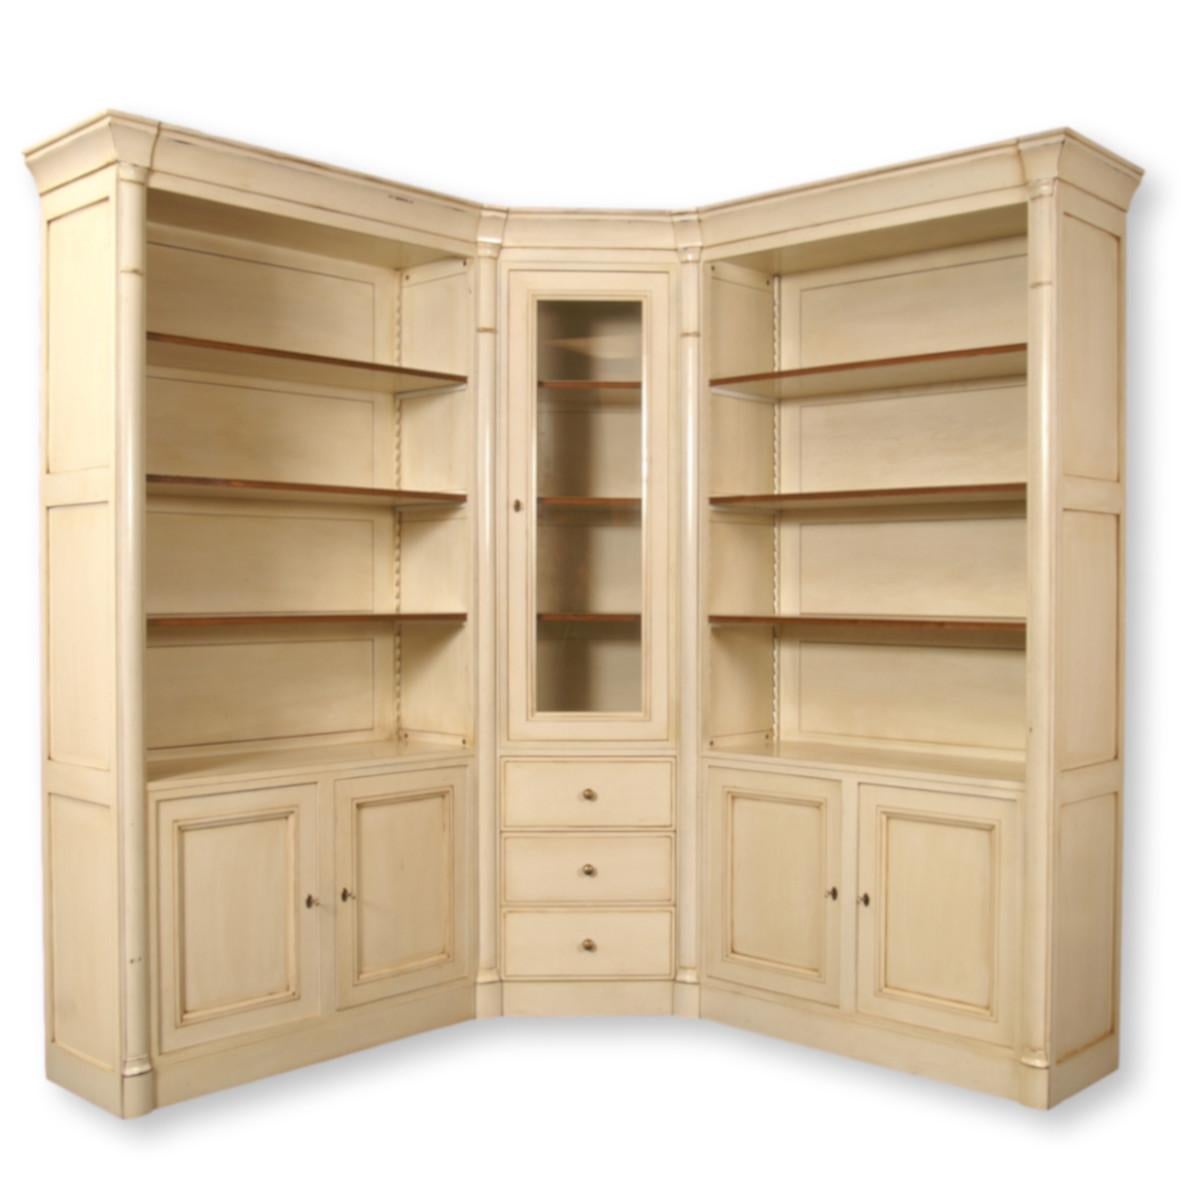 This bookcase is presented in cherry wood and can also be made in oak.

We can deliver it in 3 modules everywhere and also assemble the modules and install it directly at your place if the delivery takes place in France.

The modules used are